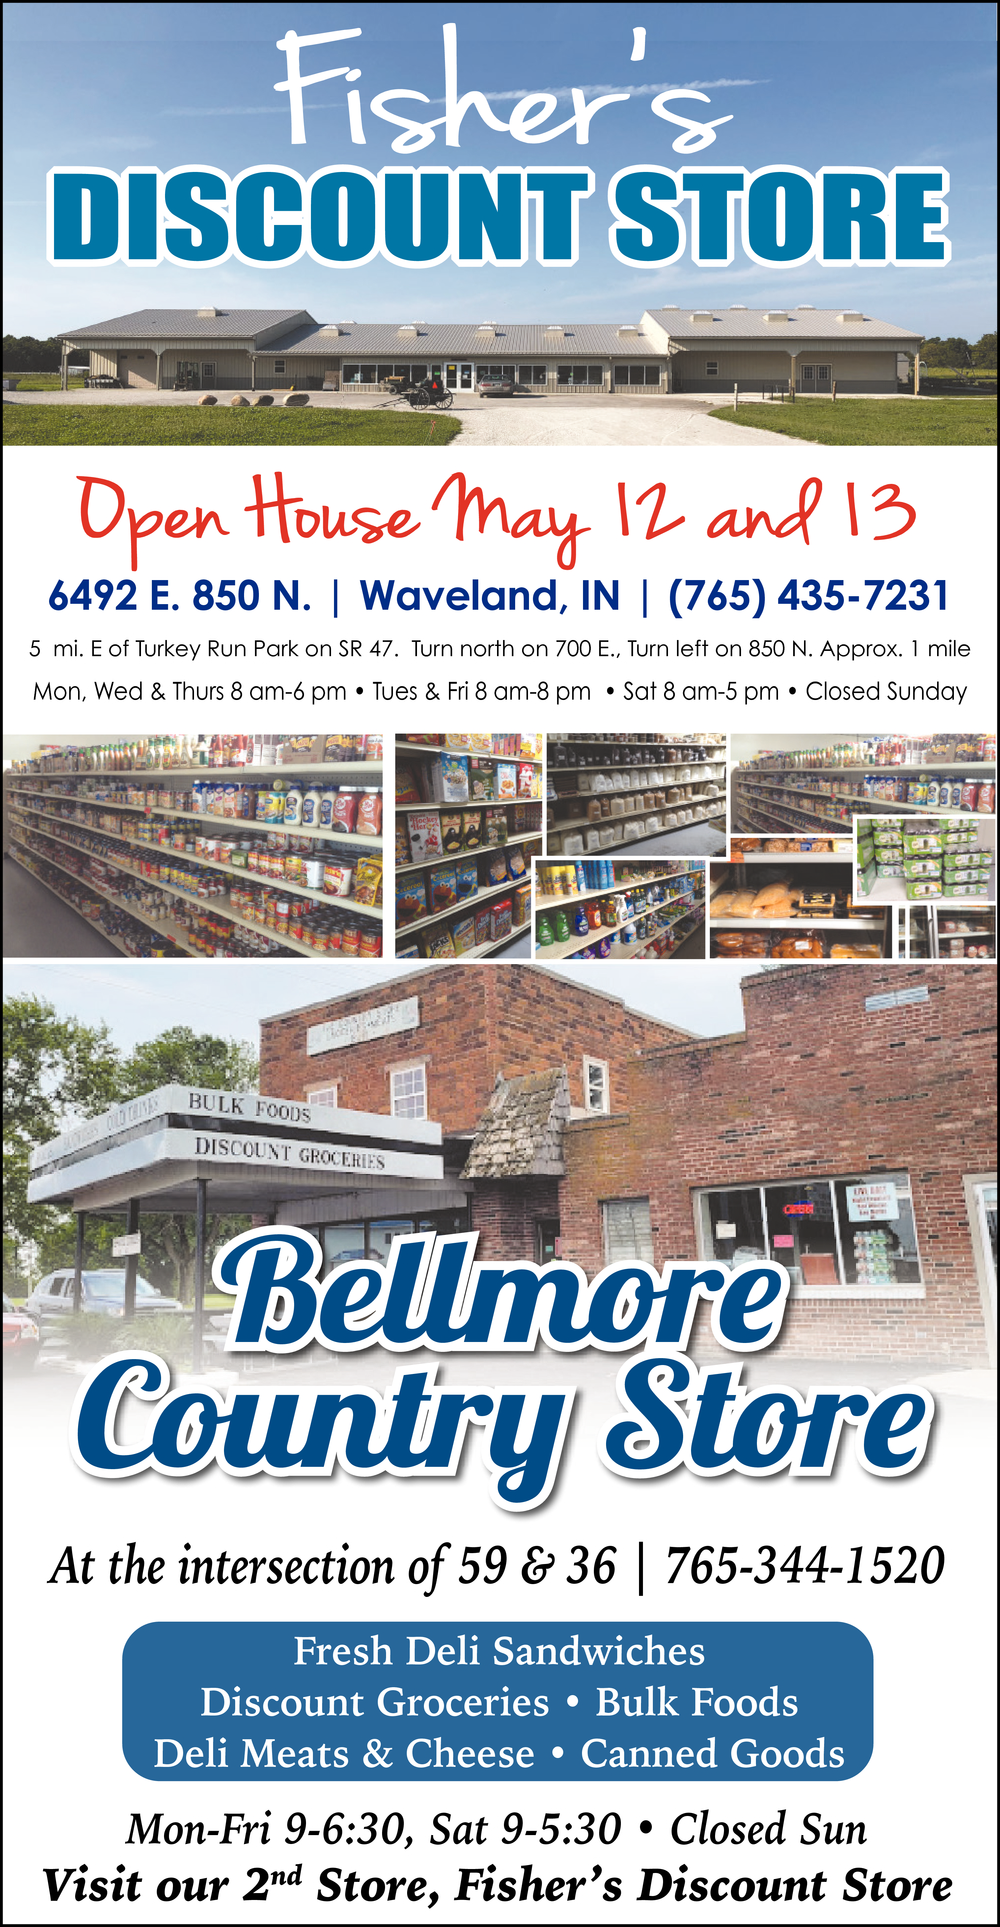 Open House, Fisher's Discount Store / Bellmore Country Store